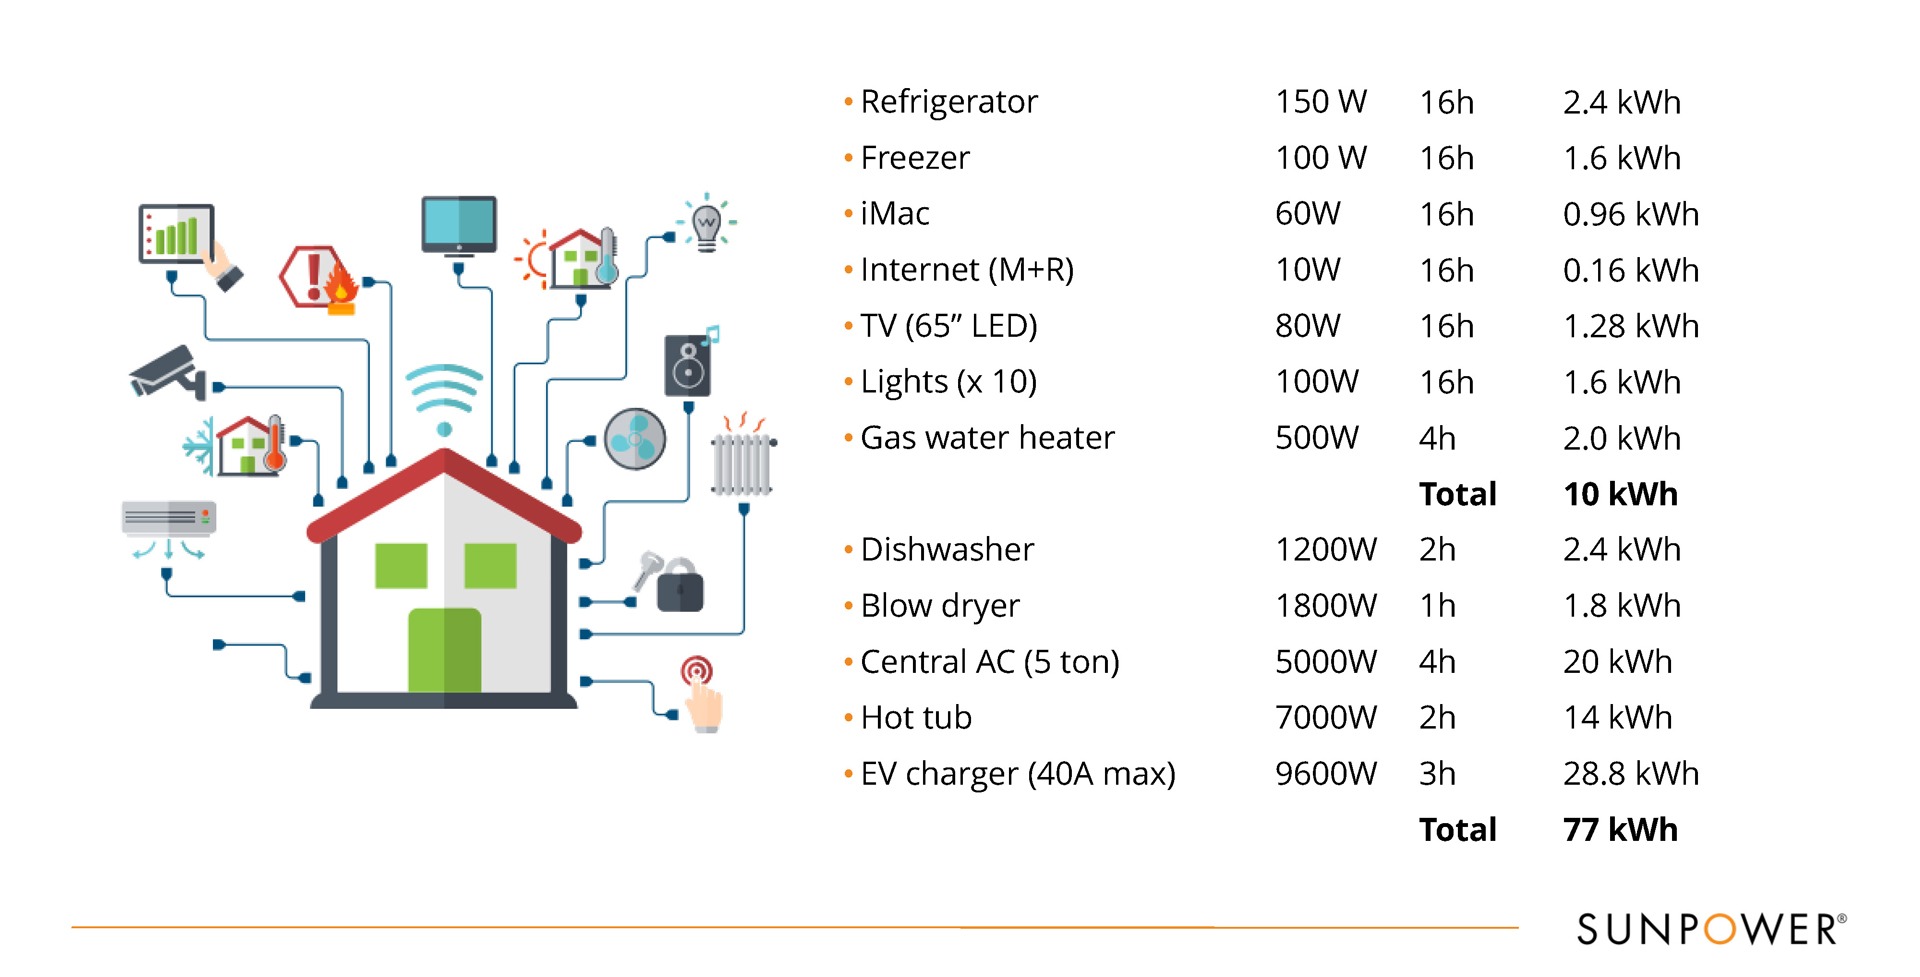 A picture of the electrical consumption for different appliances.